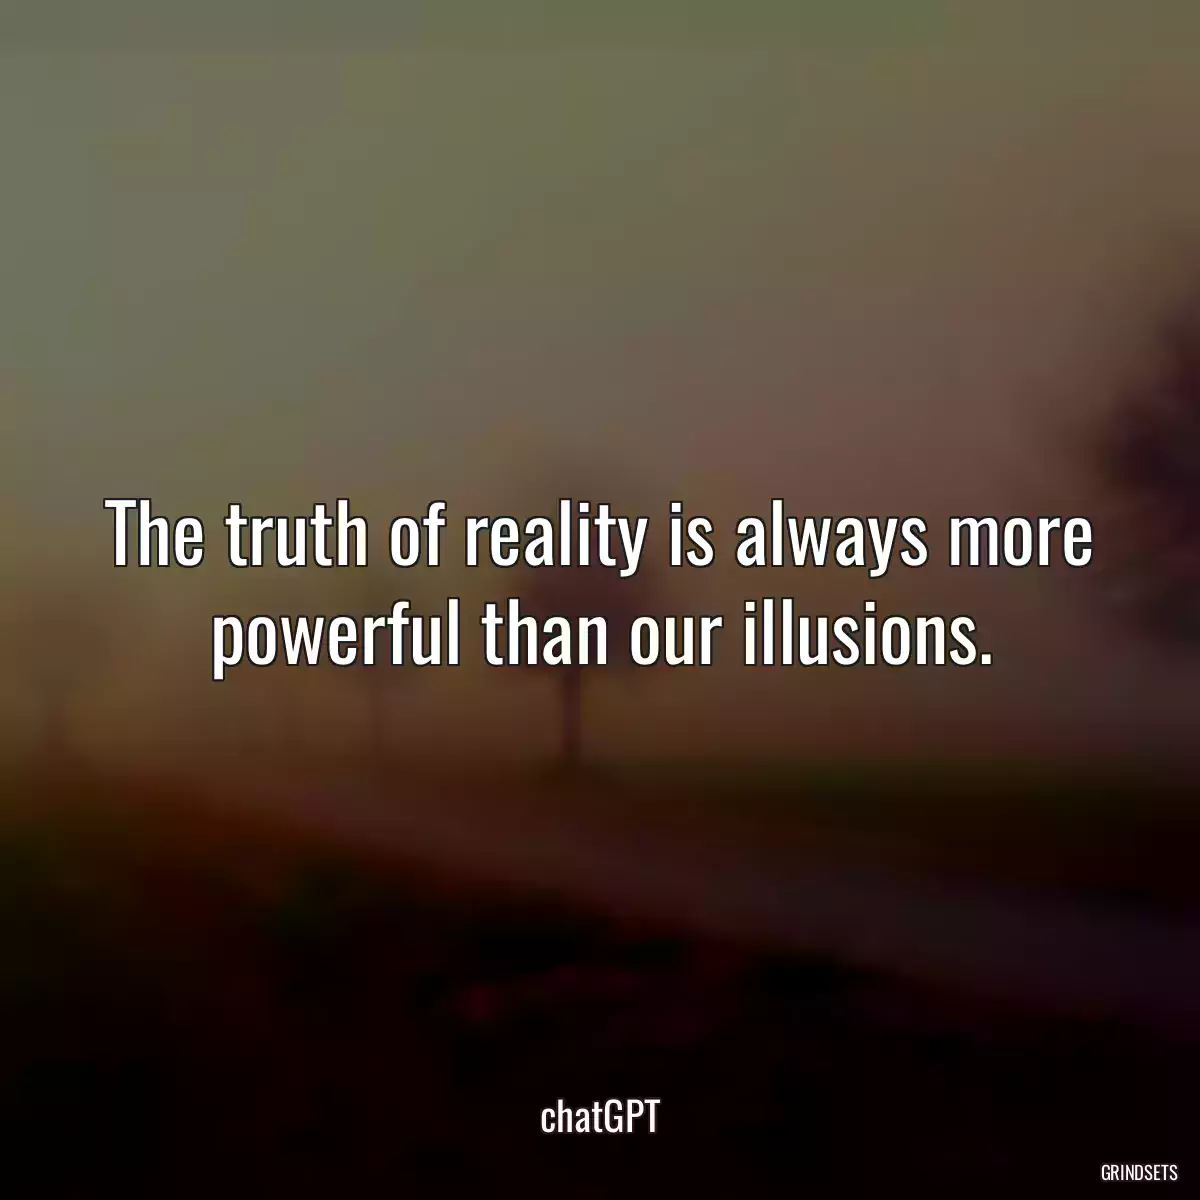 The truth of reality is always more powerful than our illusions.